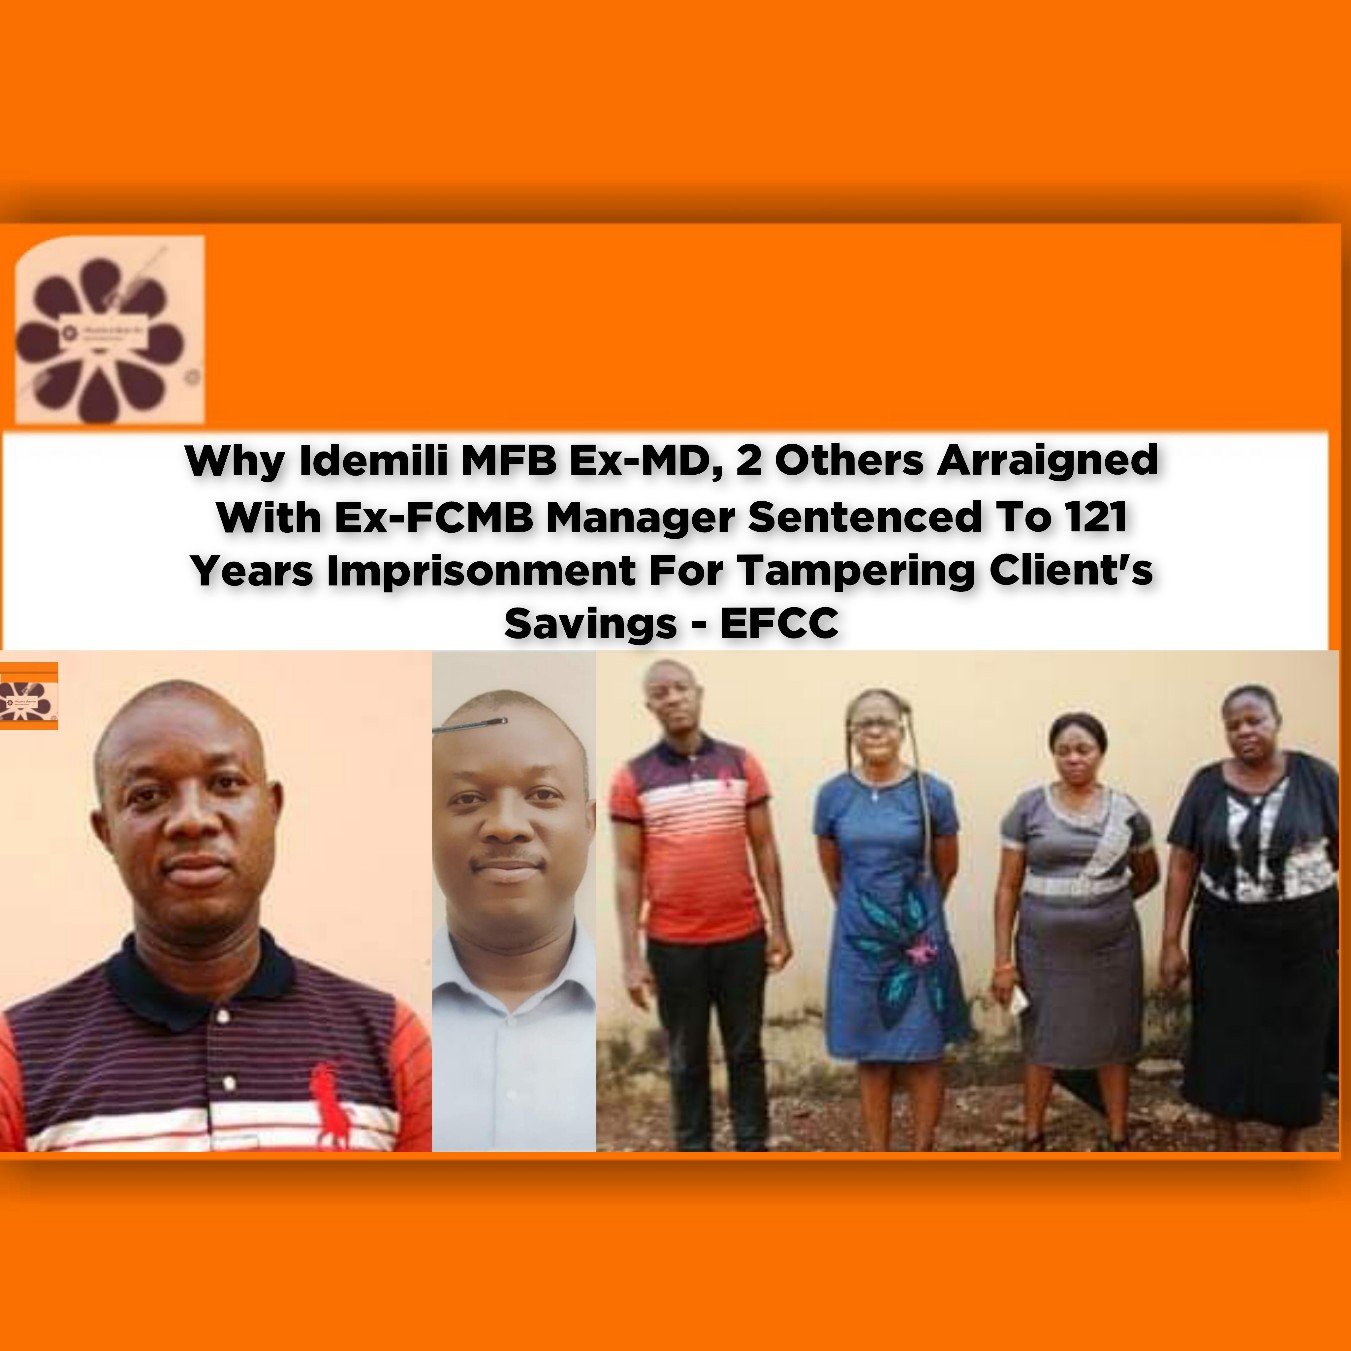 Why Idemili MFB Ex-MD, 2 Others Arraigned With Ex-FCMB Manager Sentenced To 121 Years Imprisonment For Tampering Client's Savings - EFCC ~ OsazuwaAkonedo #Islamabad